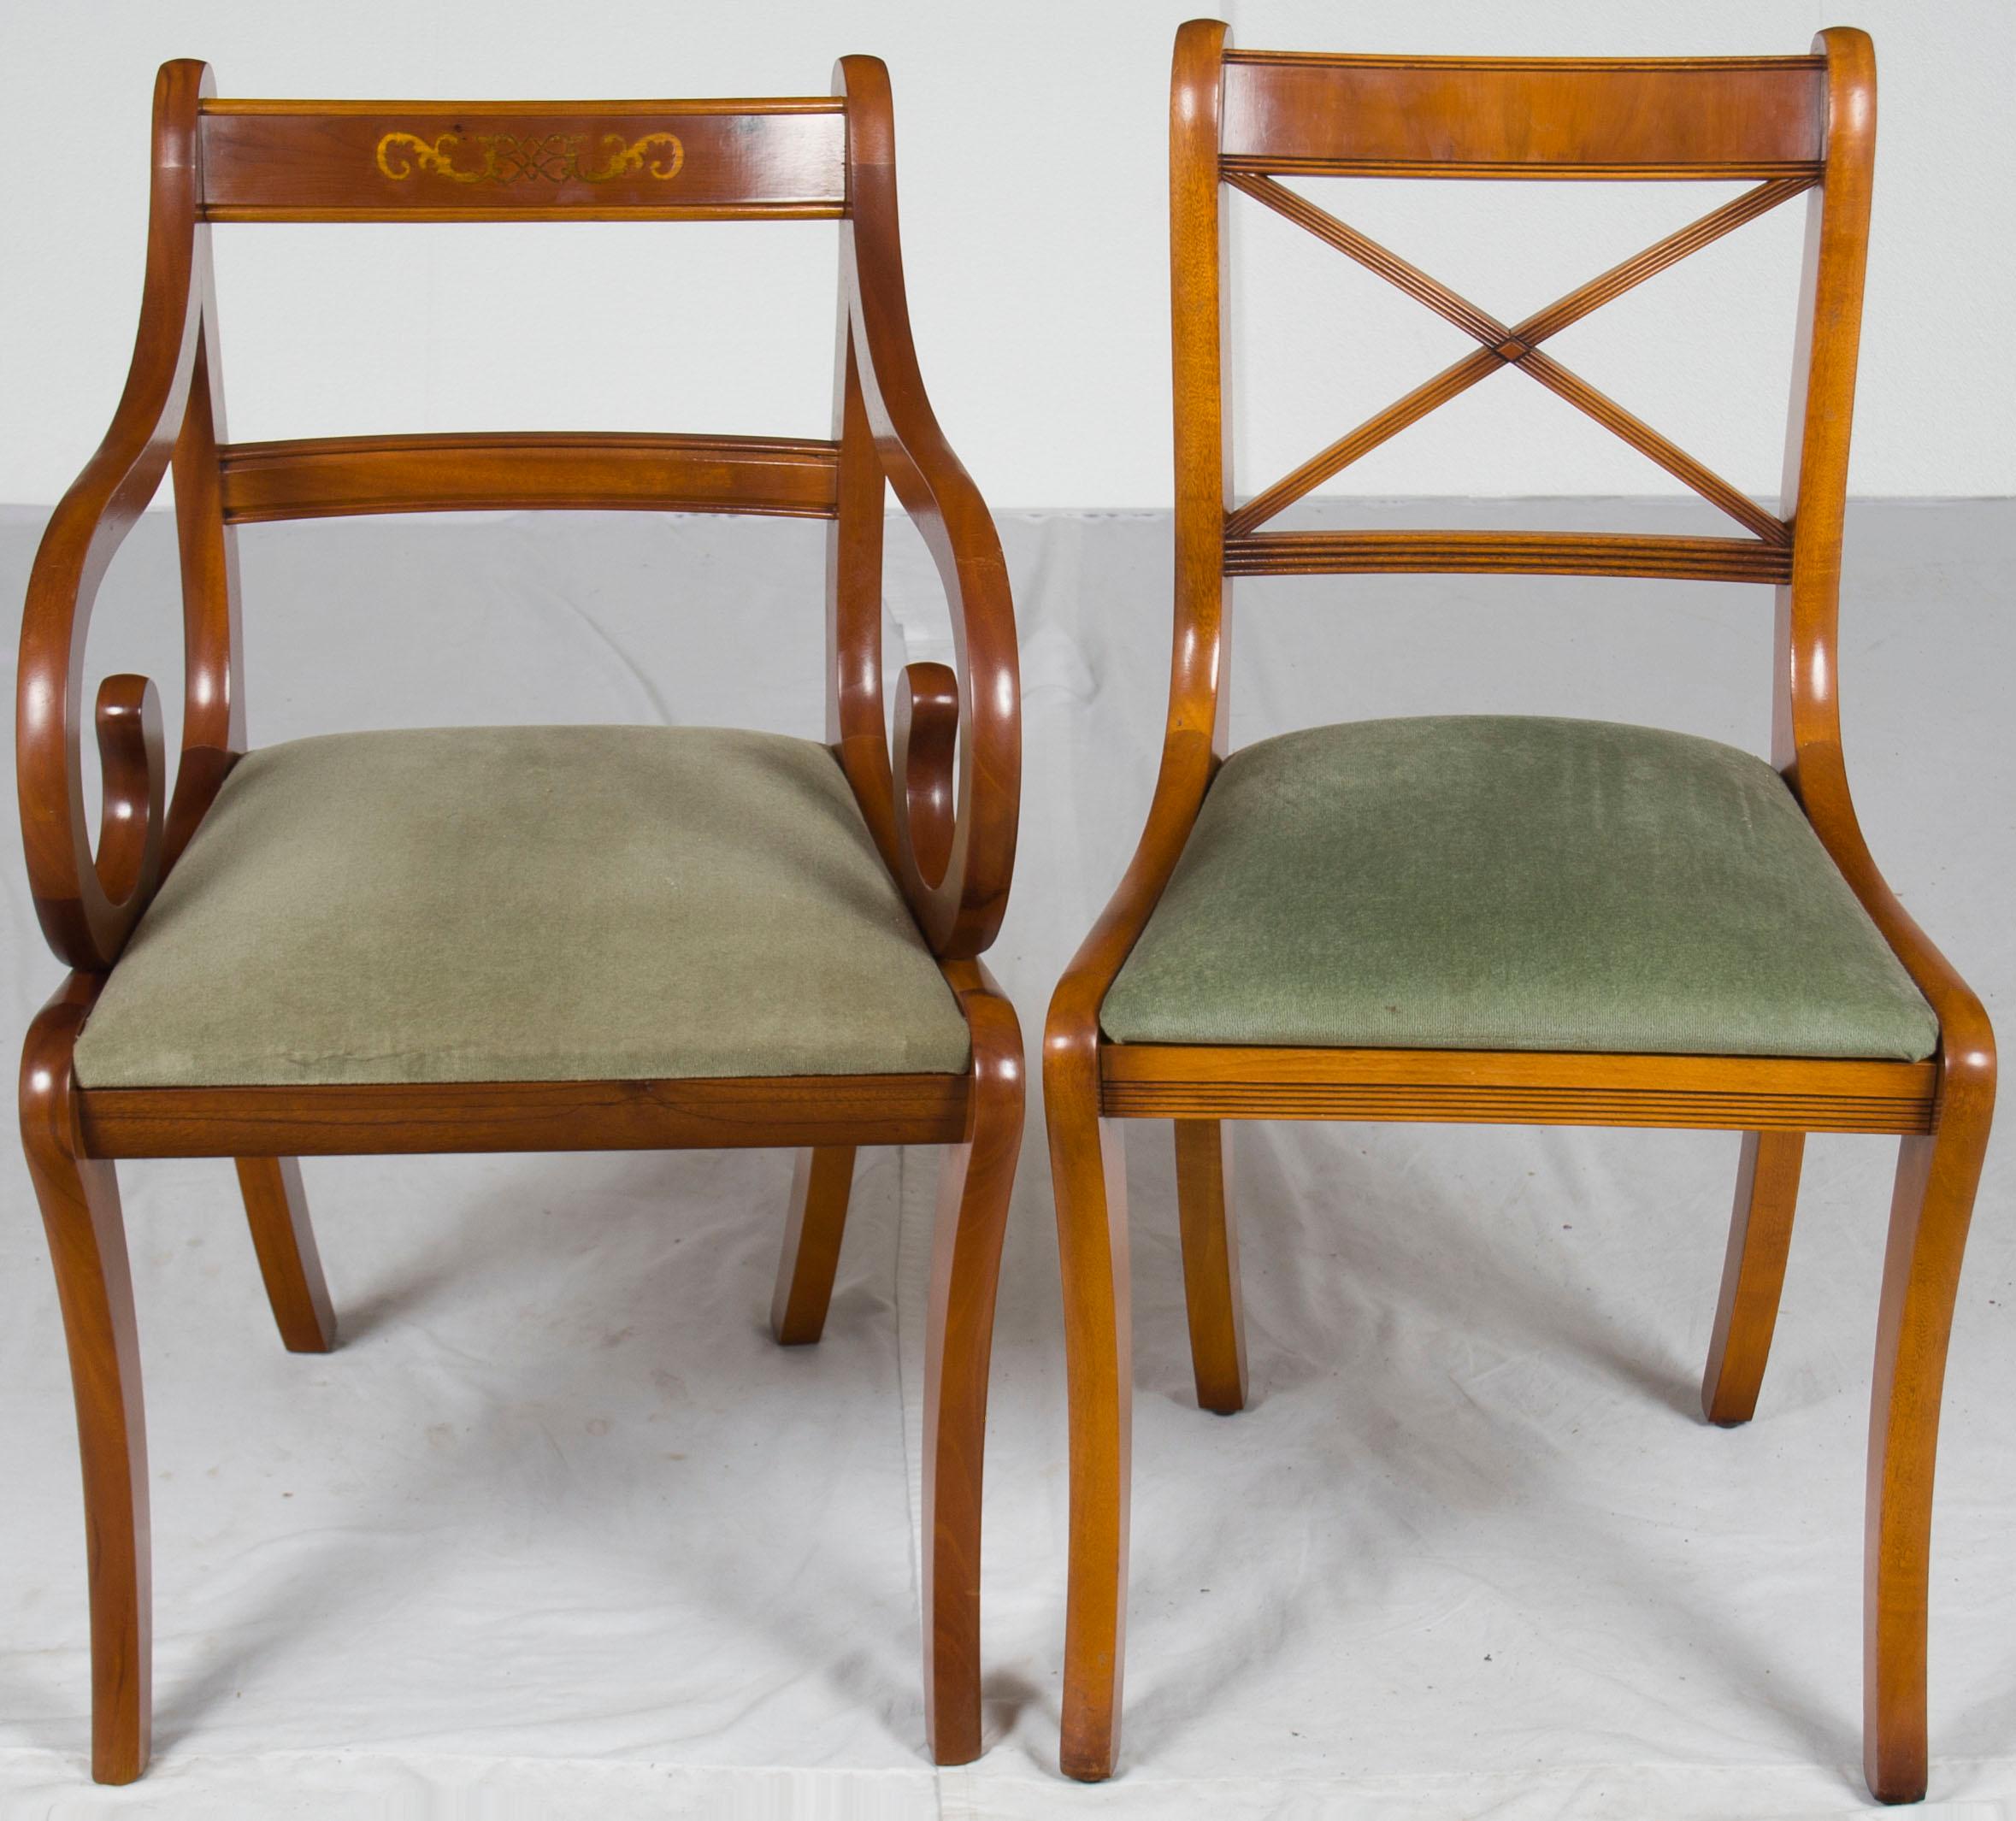 Here we have a lovely set of six Regency style dining room chairs consisting of four side chairs and two arm chairs. This set was made in England around the year 1960 of gorgeous yew wood. They epitomize Regency chairs with their sabre shaped back